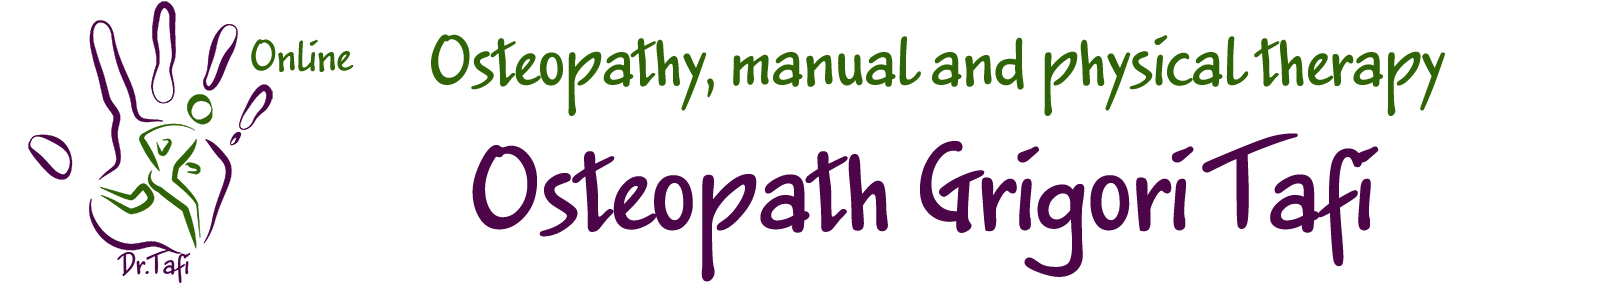 Osteopath and manual therapist